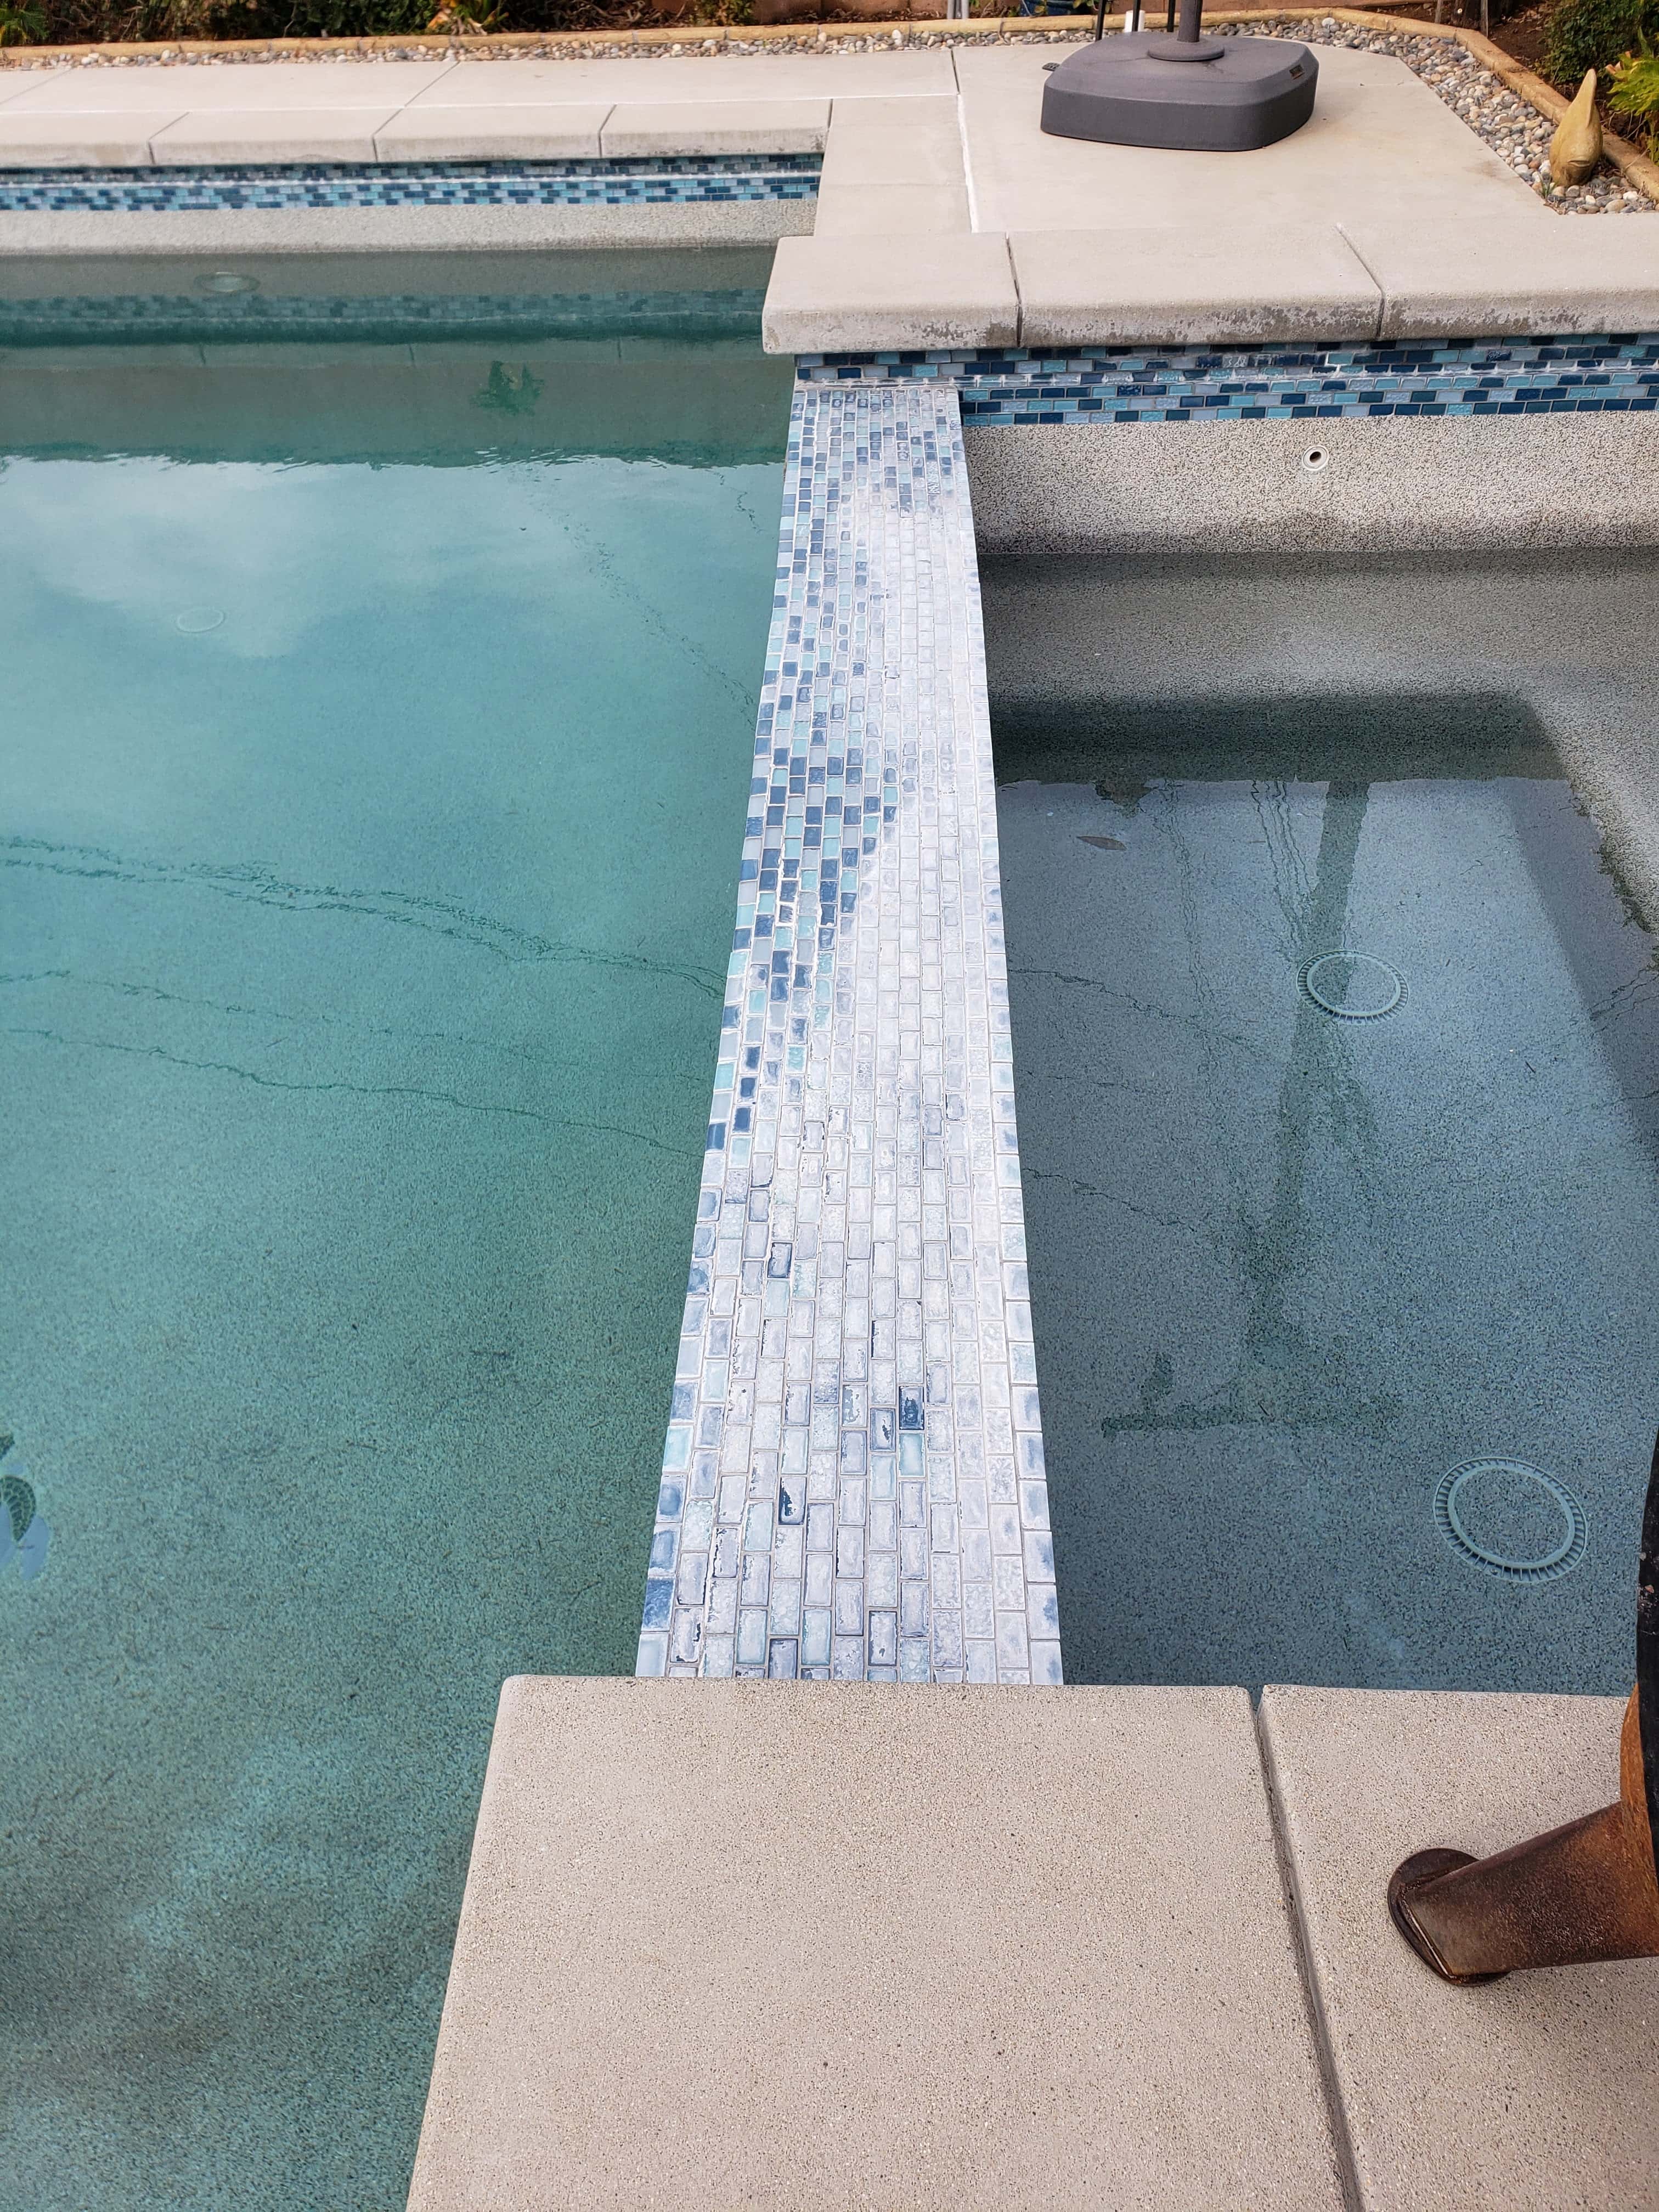 Specialties Aquatic Tile Cleaning - Duarte, CA, US, pool tile cleaning